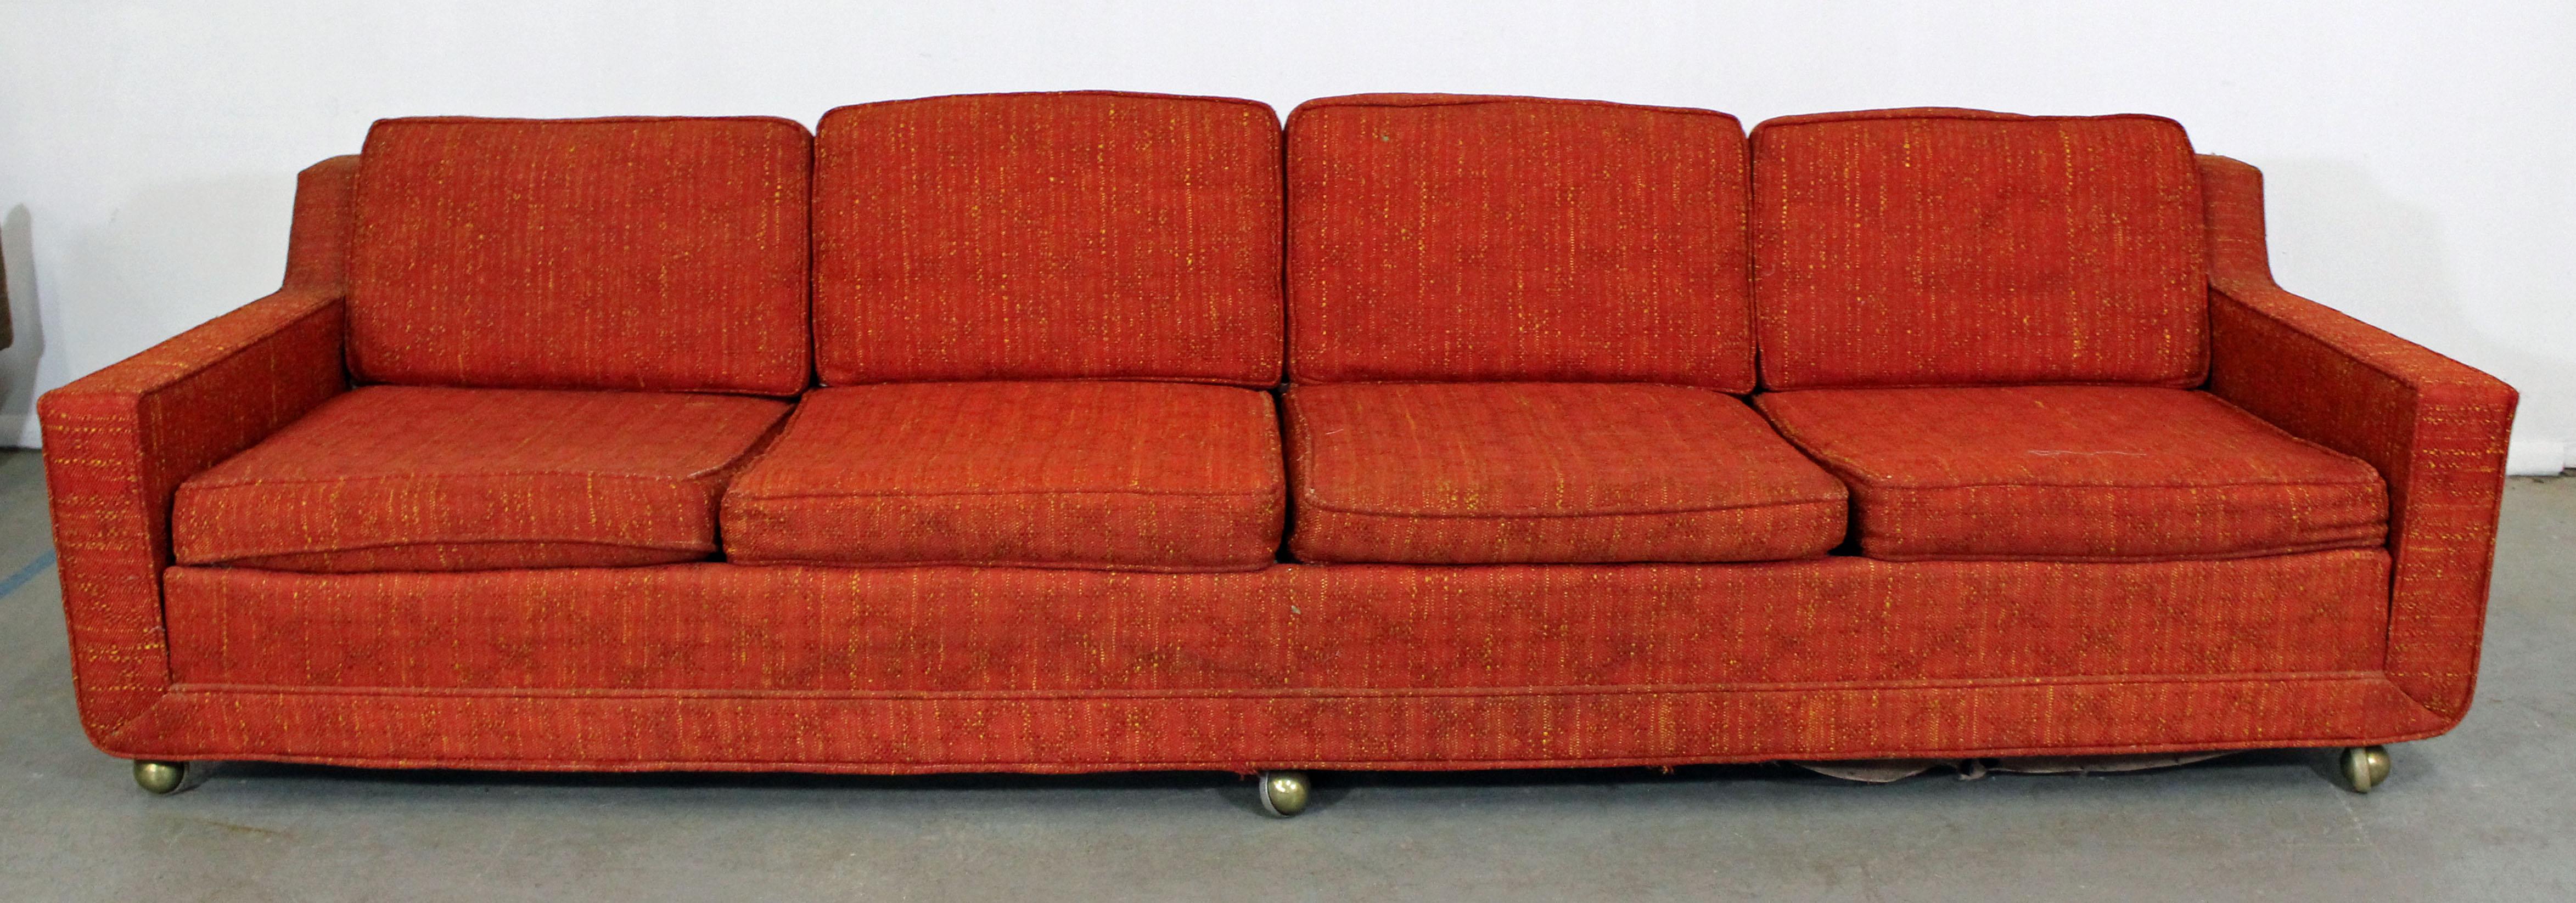 What a find. Offered is an elongated midcentury sofa with four seats by Kroehler. Features three caster wheels in front and wood legs in back, which makes for easy moving. Perfect for entertaining! It is structurally sound showing age wear. Will